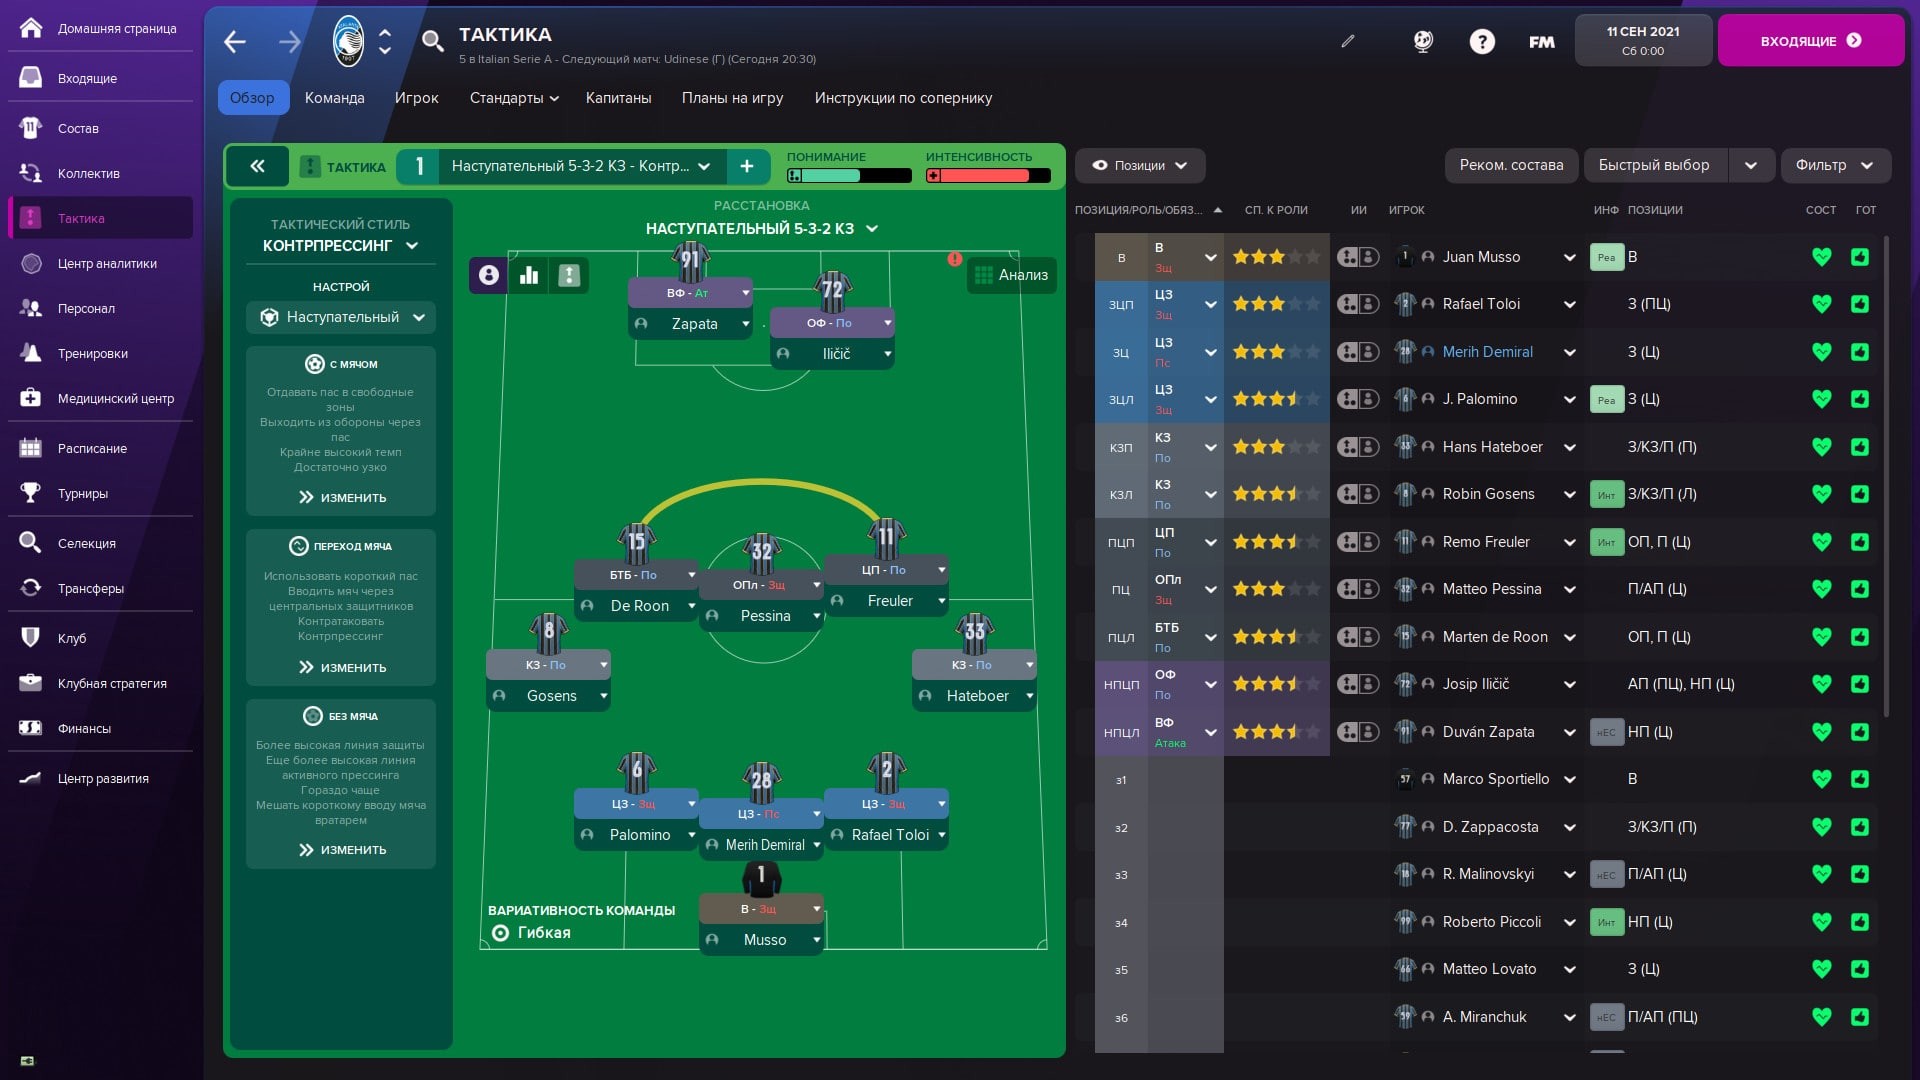 Football Manager 2022 for macOS 中文版,Football Manager,Football Manager中文版,Football Manager中文官网,Football Manager官网,Football Manager正版下载,Football Manager正版限免,Football Manager破解版,Football Manager注册版,Football Manager注册码,Football Manager免费下载,Football Manager下载,Football Manager激活版下载,Football Manager中文版下载,Football Manager专业版,Football Manager中文专业版下载